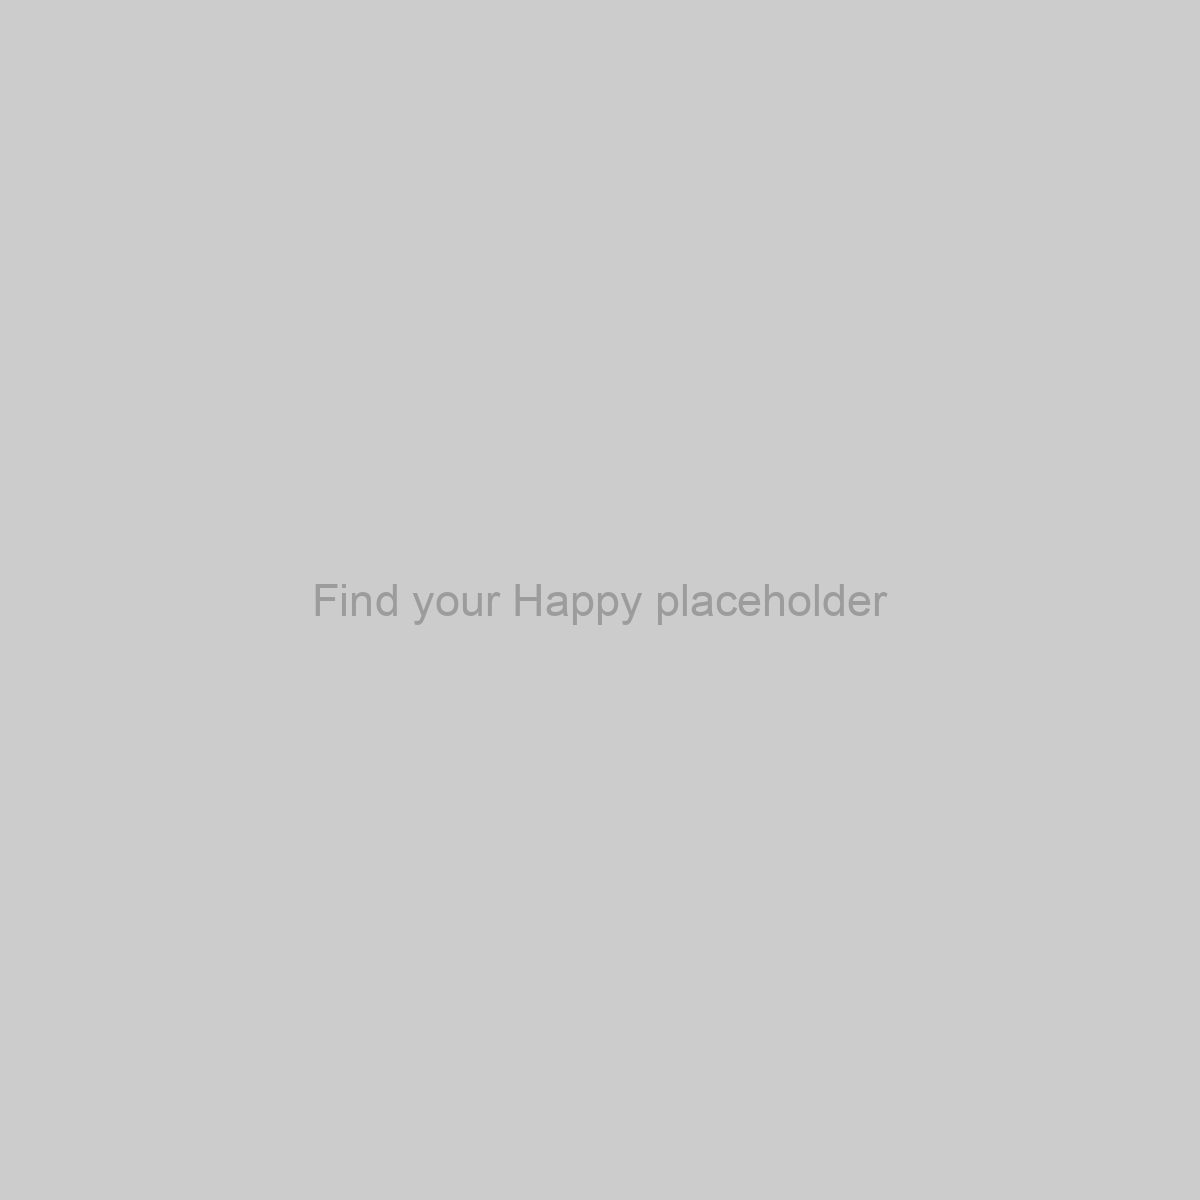 Find your Happy Placeholder Image